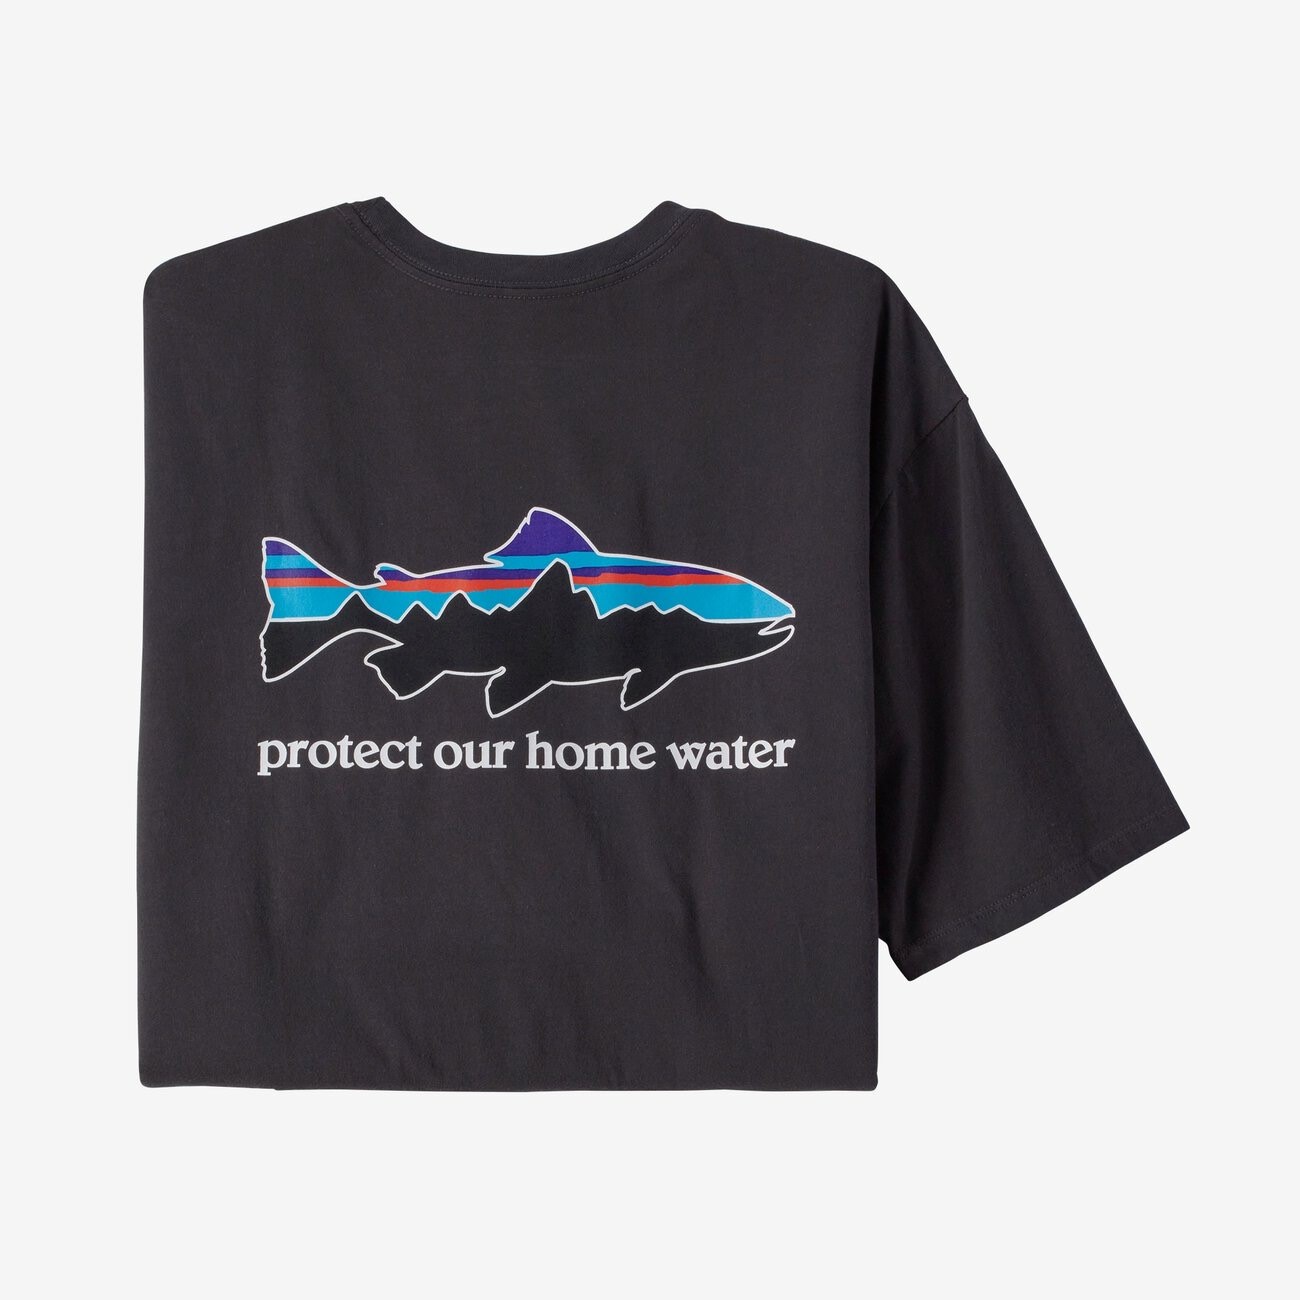 Patagonia M's Home Water Trout Organic T-Shirt - Ink Black - XL